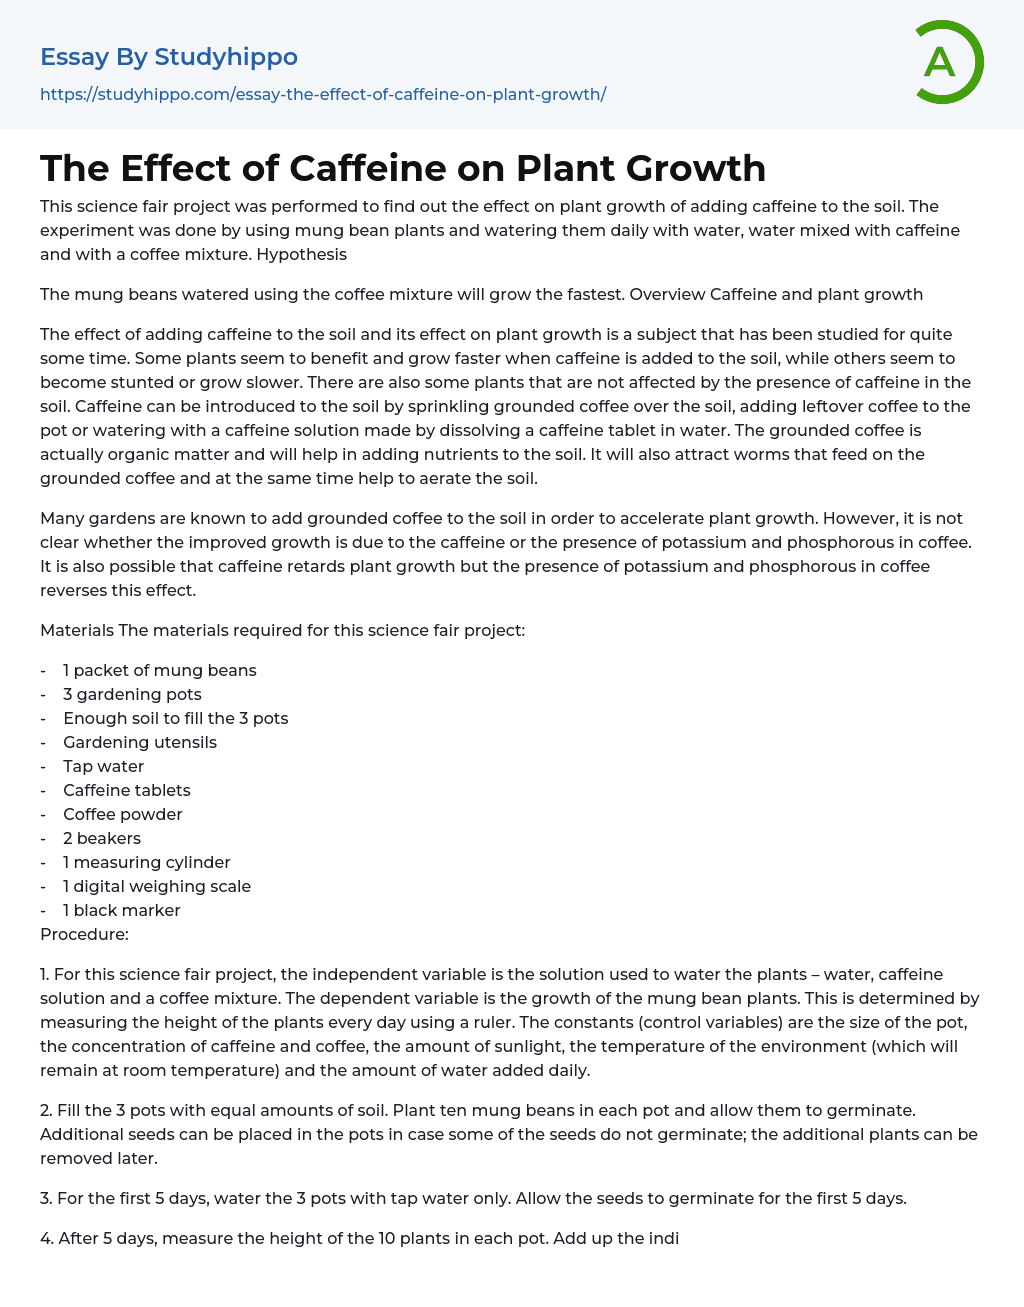 The Effect of Caffeine on Plant Growth Essay Example